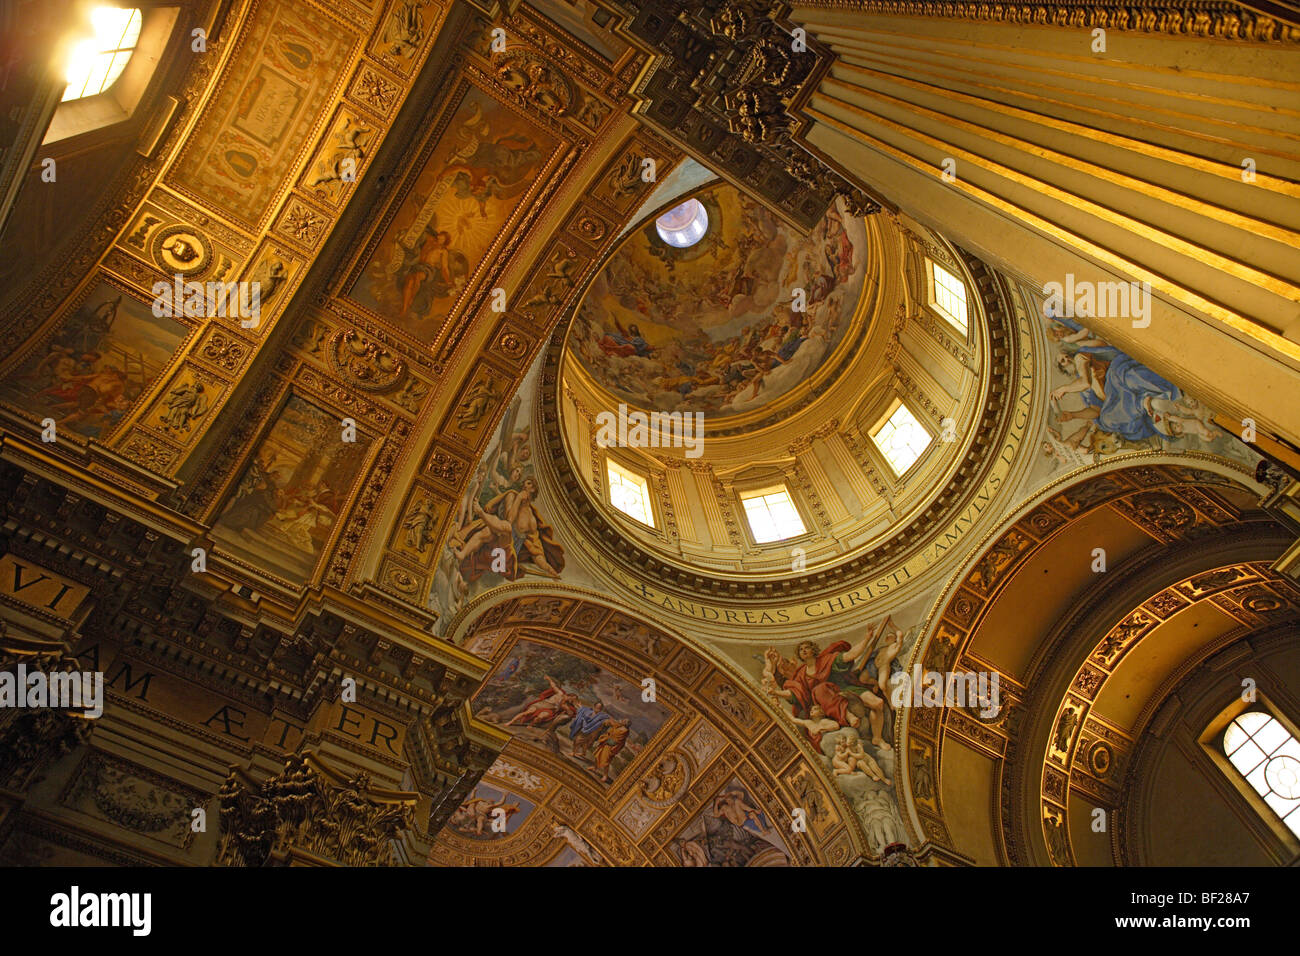 Interior view of the church S. Andrea della Valle, view at the ceiling, Rome, Italy, Europe Stock Photo